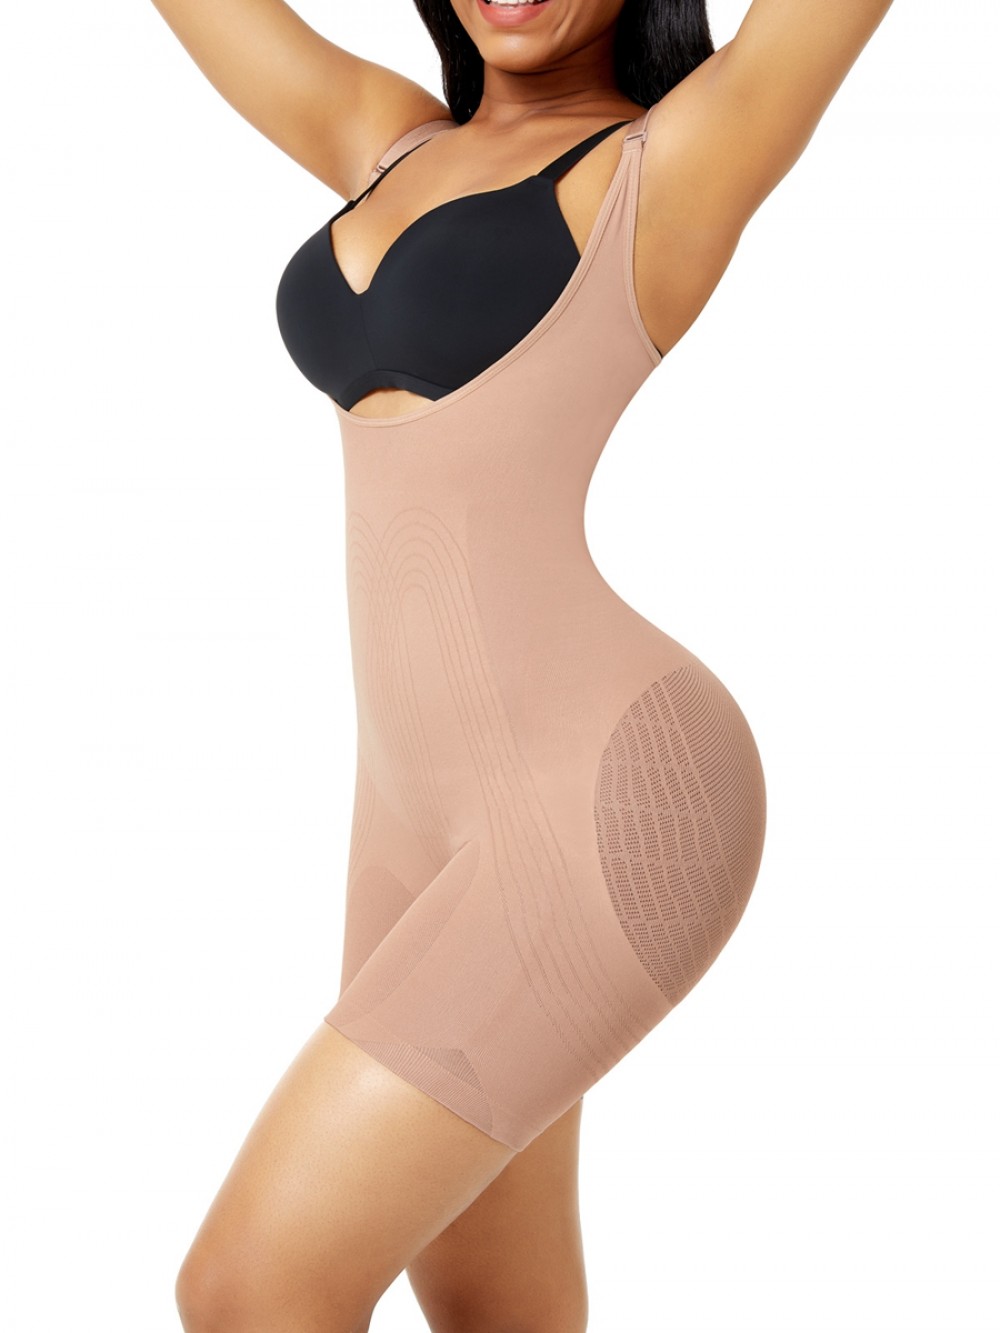 Nude Butt Lifter Large Size Seamless Body Shaper Soft-Touch